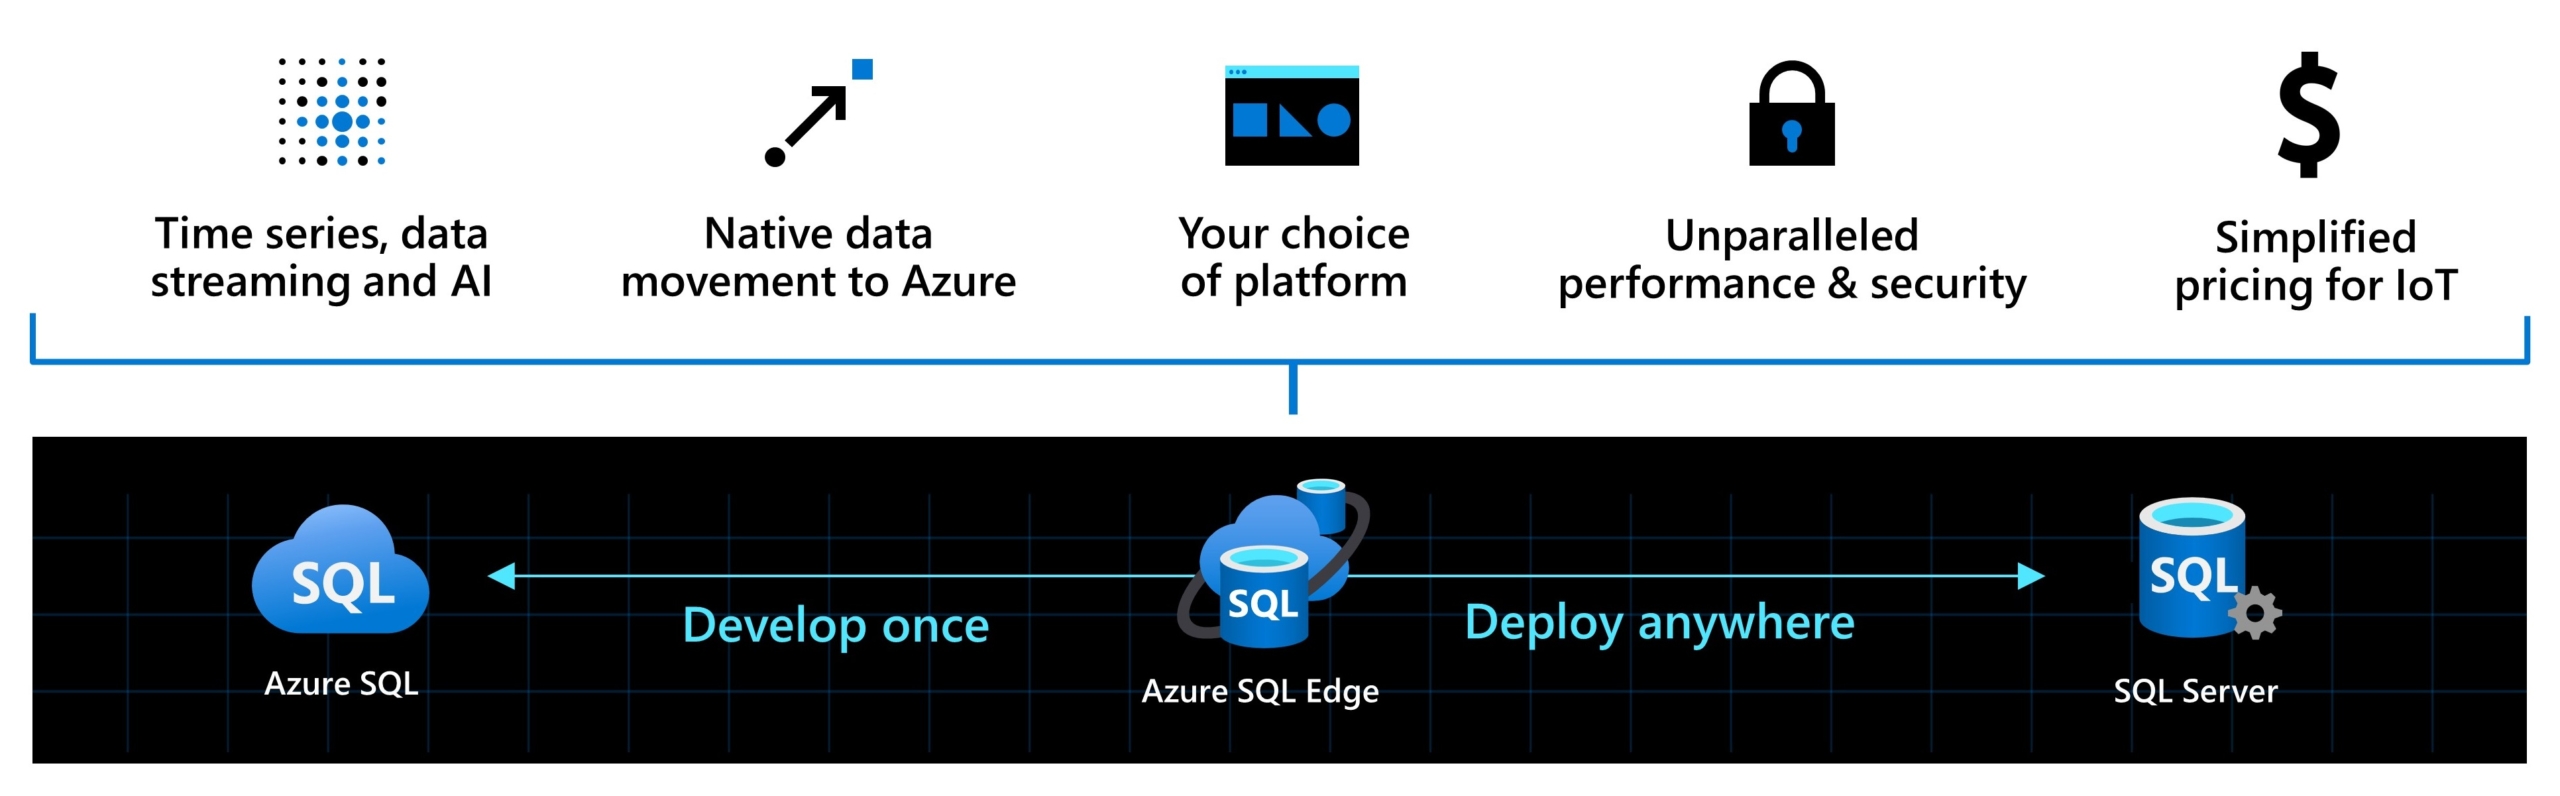 Azure SQL Edge meets the demands of IoT with the performance and security of SQL